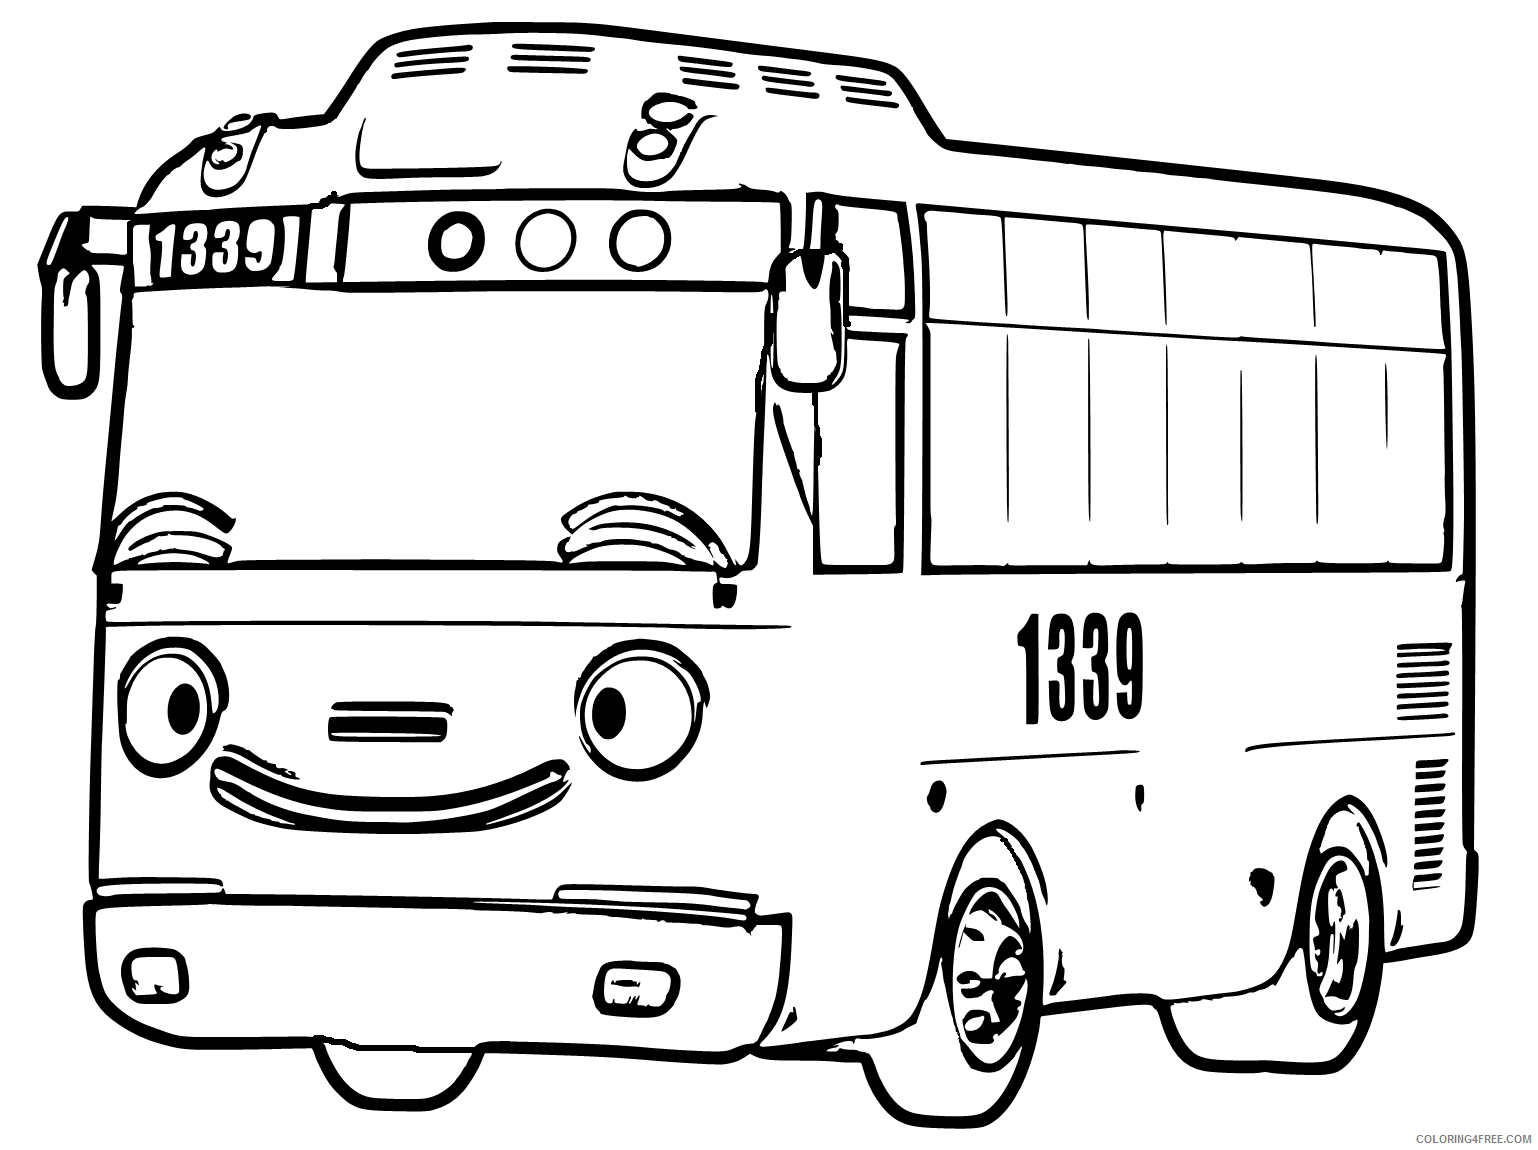 Tayo the Little Bus Coloring Pages TV Film Tayo Printable 2020 08388 Coloring4free